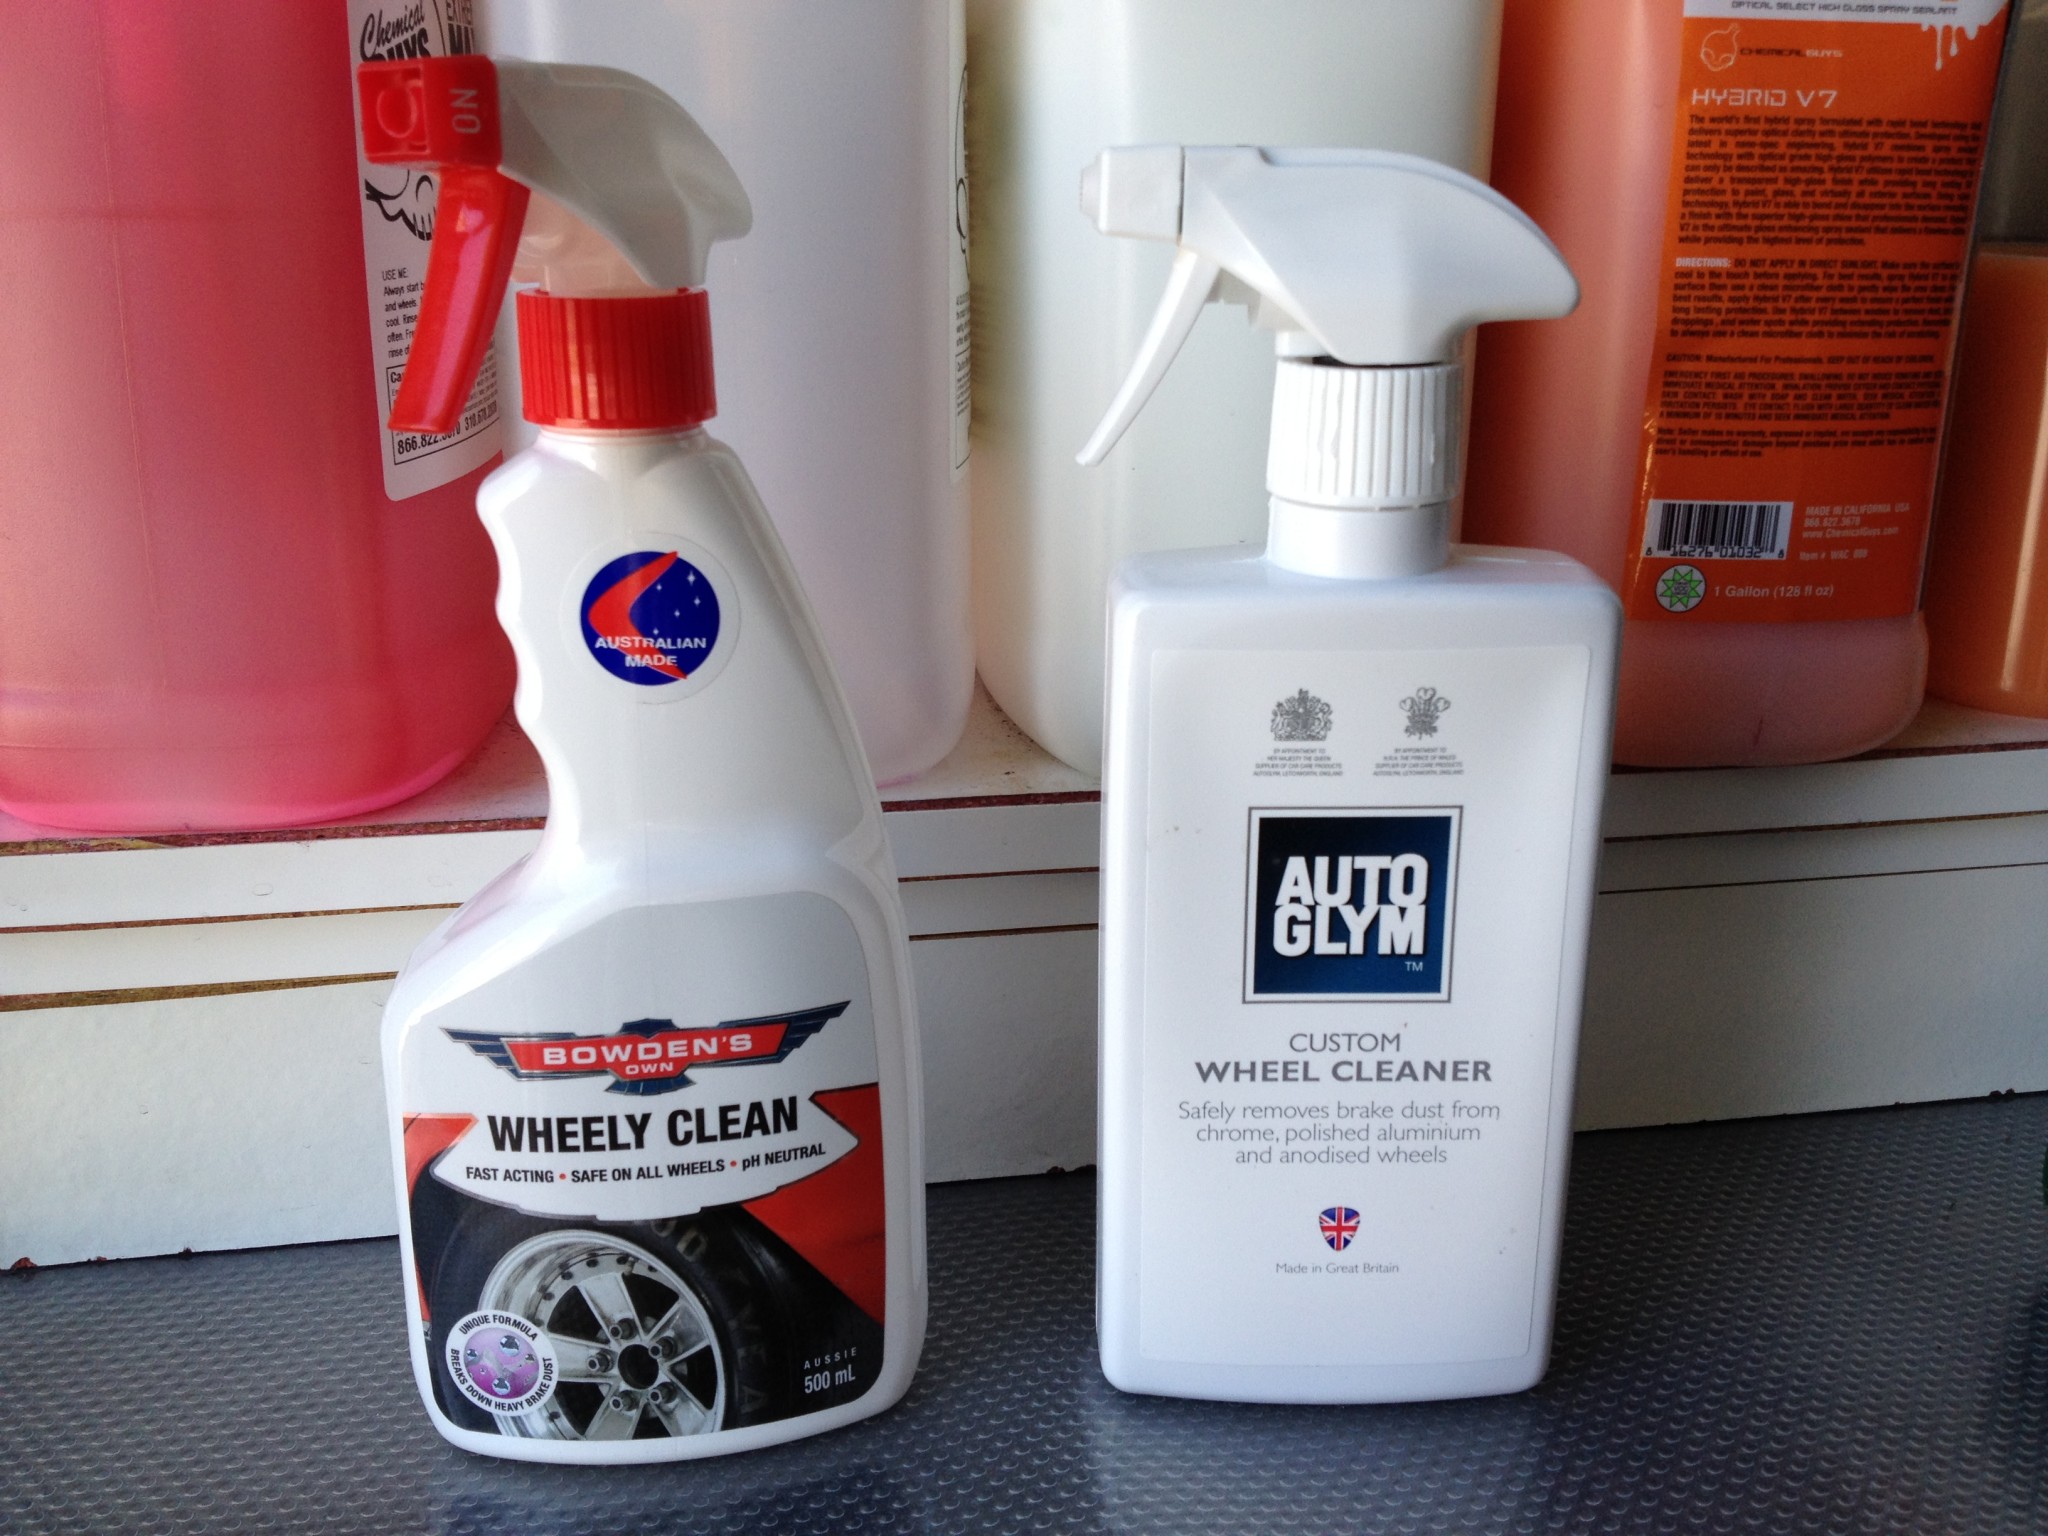 How to Clean Brake Dust with Bowden's Own